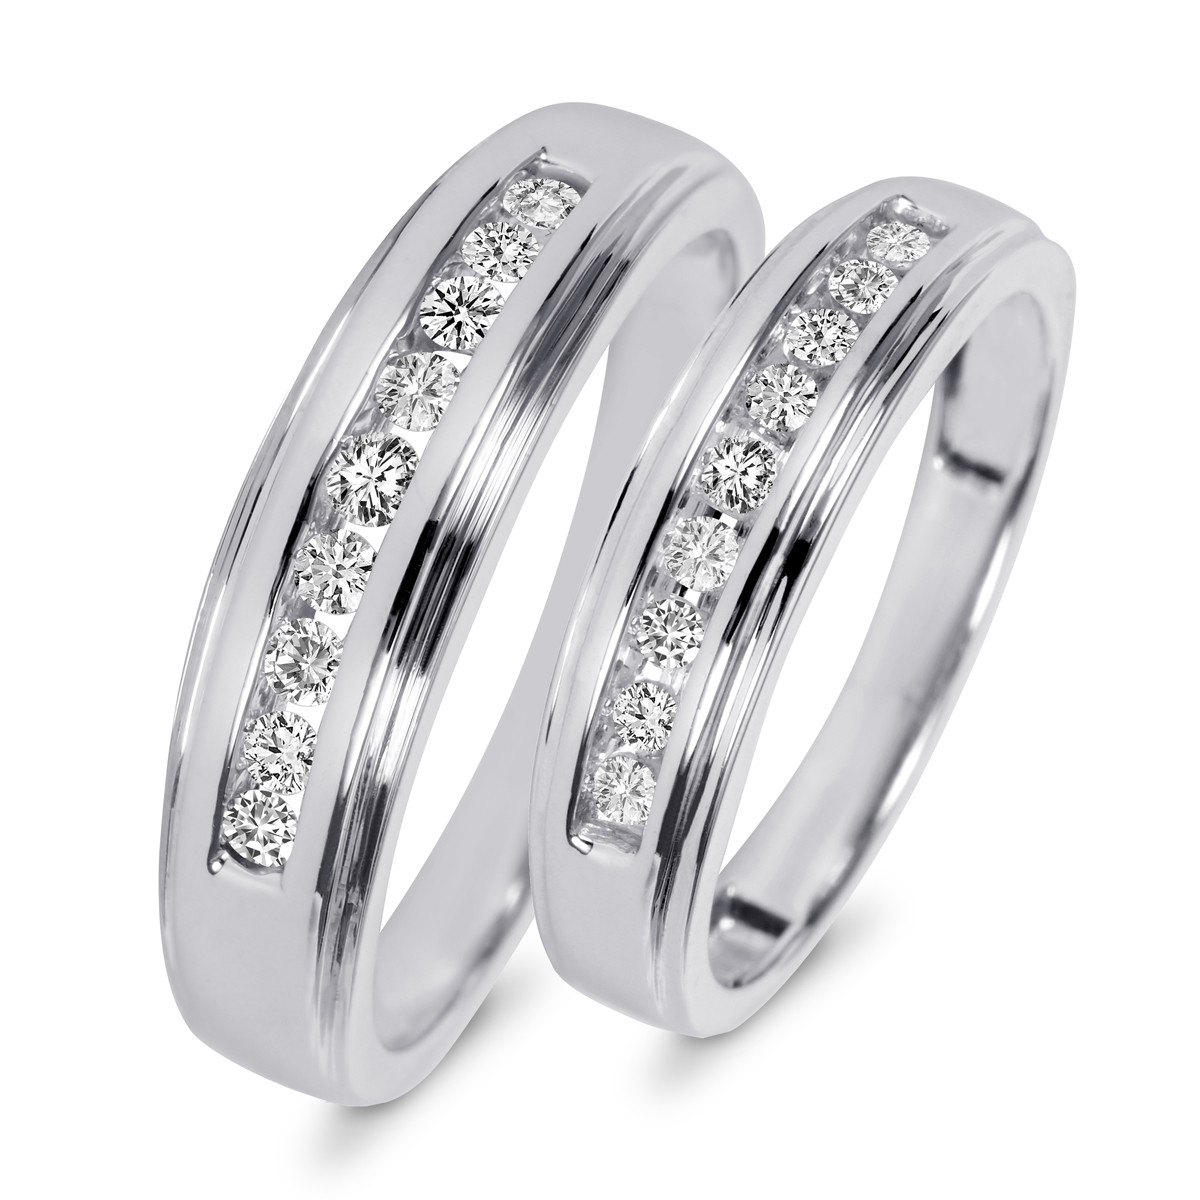 Wedding Band Sets His And Hers
 3 8 Carat T W Diamond His And Hers Wedding Band Set 10K